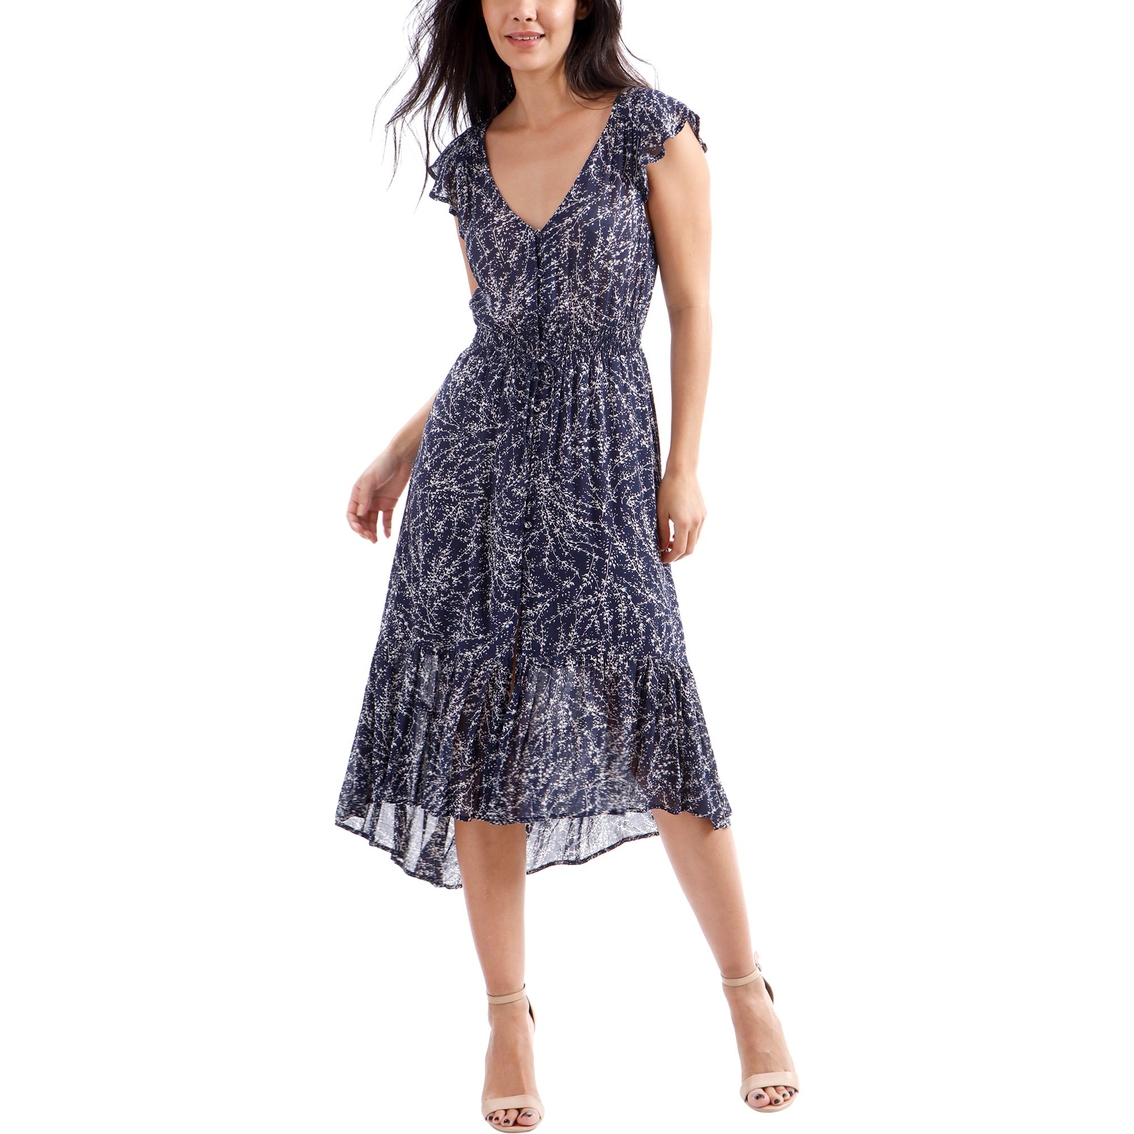 Lucky Brand Felice Floral Dress, Dresses, Clothing & Accessories